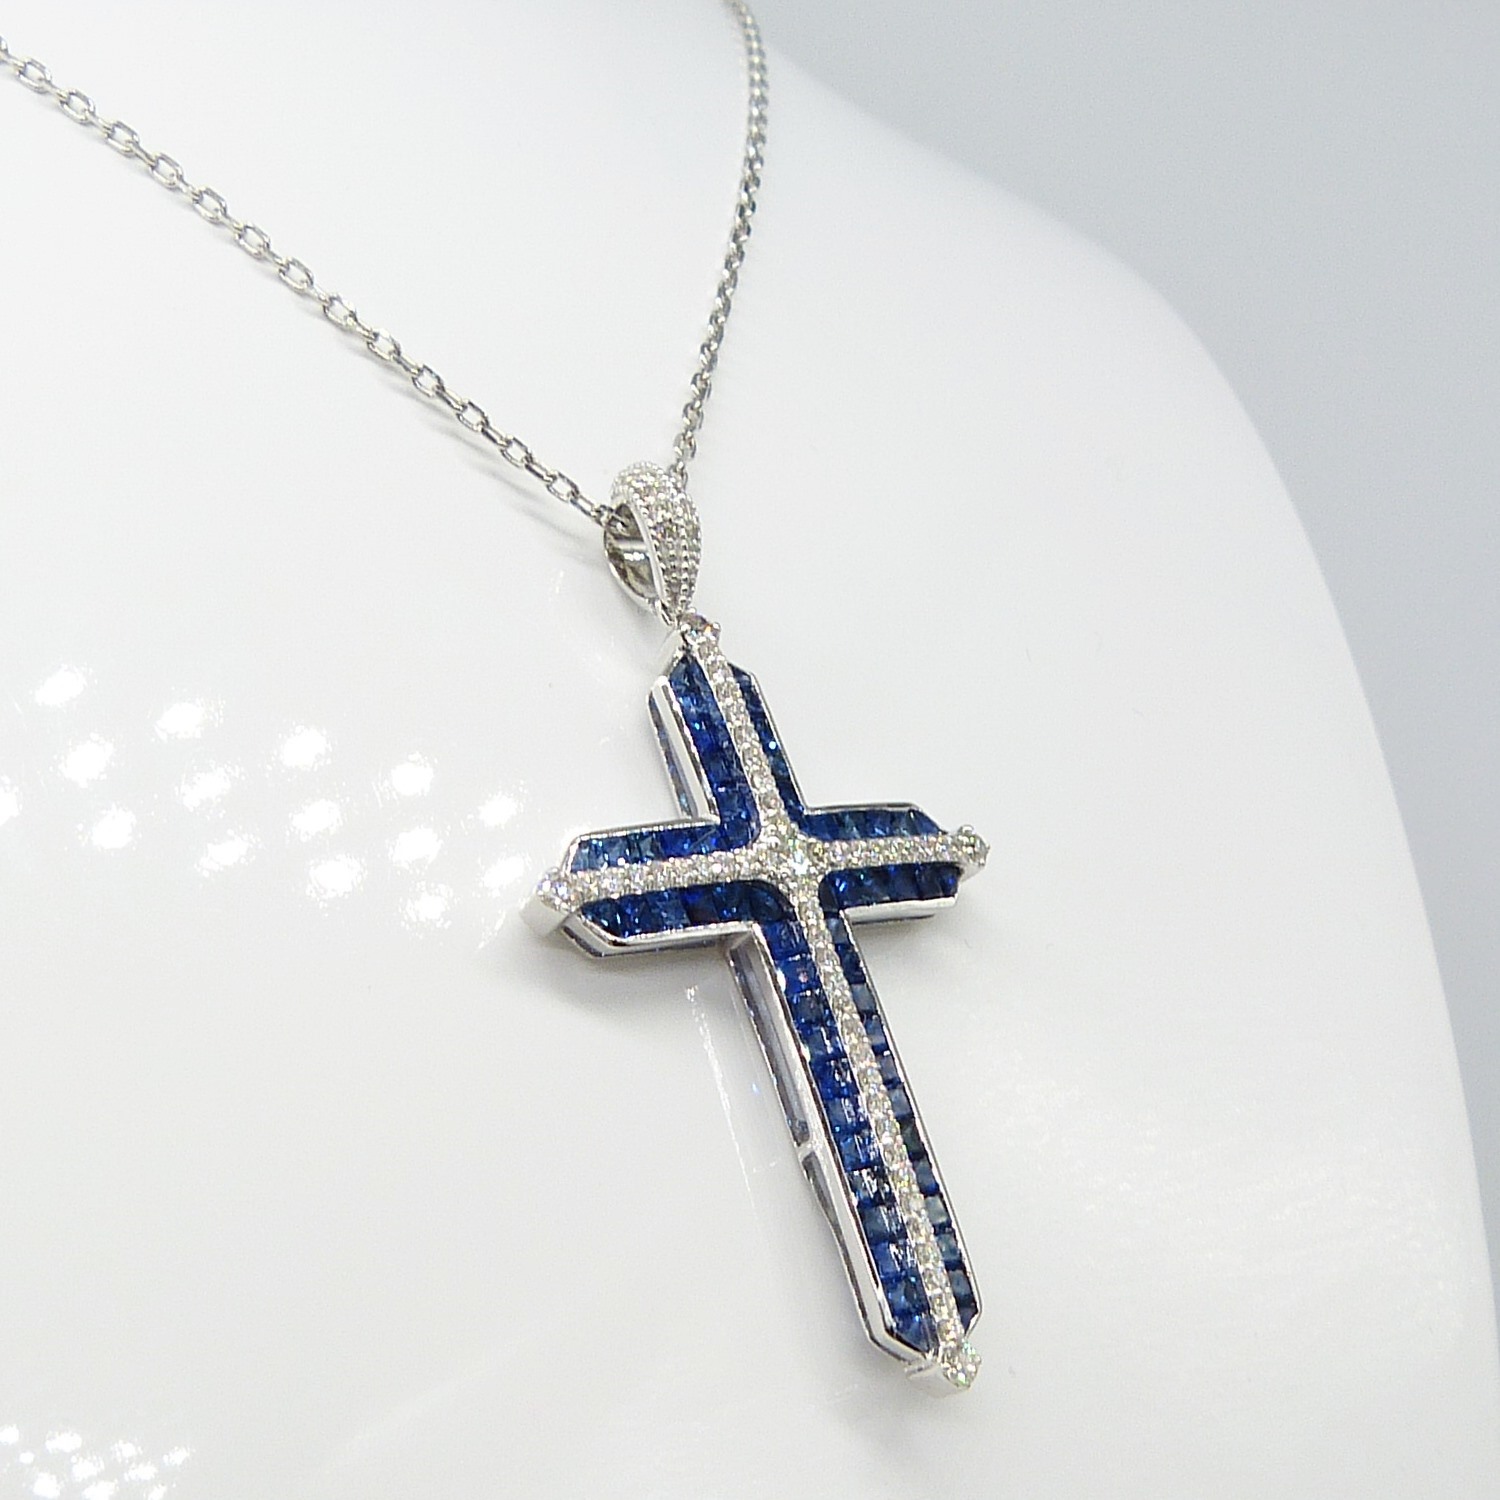 Impressive cross necklace set with natural sapphires and diamonds in 18ct white gold, boxed - Image 4 of 8